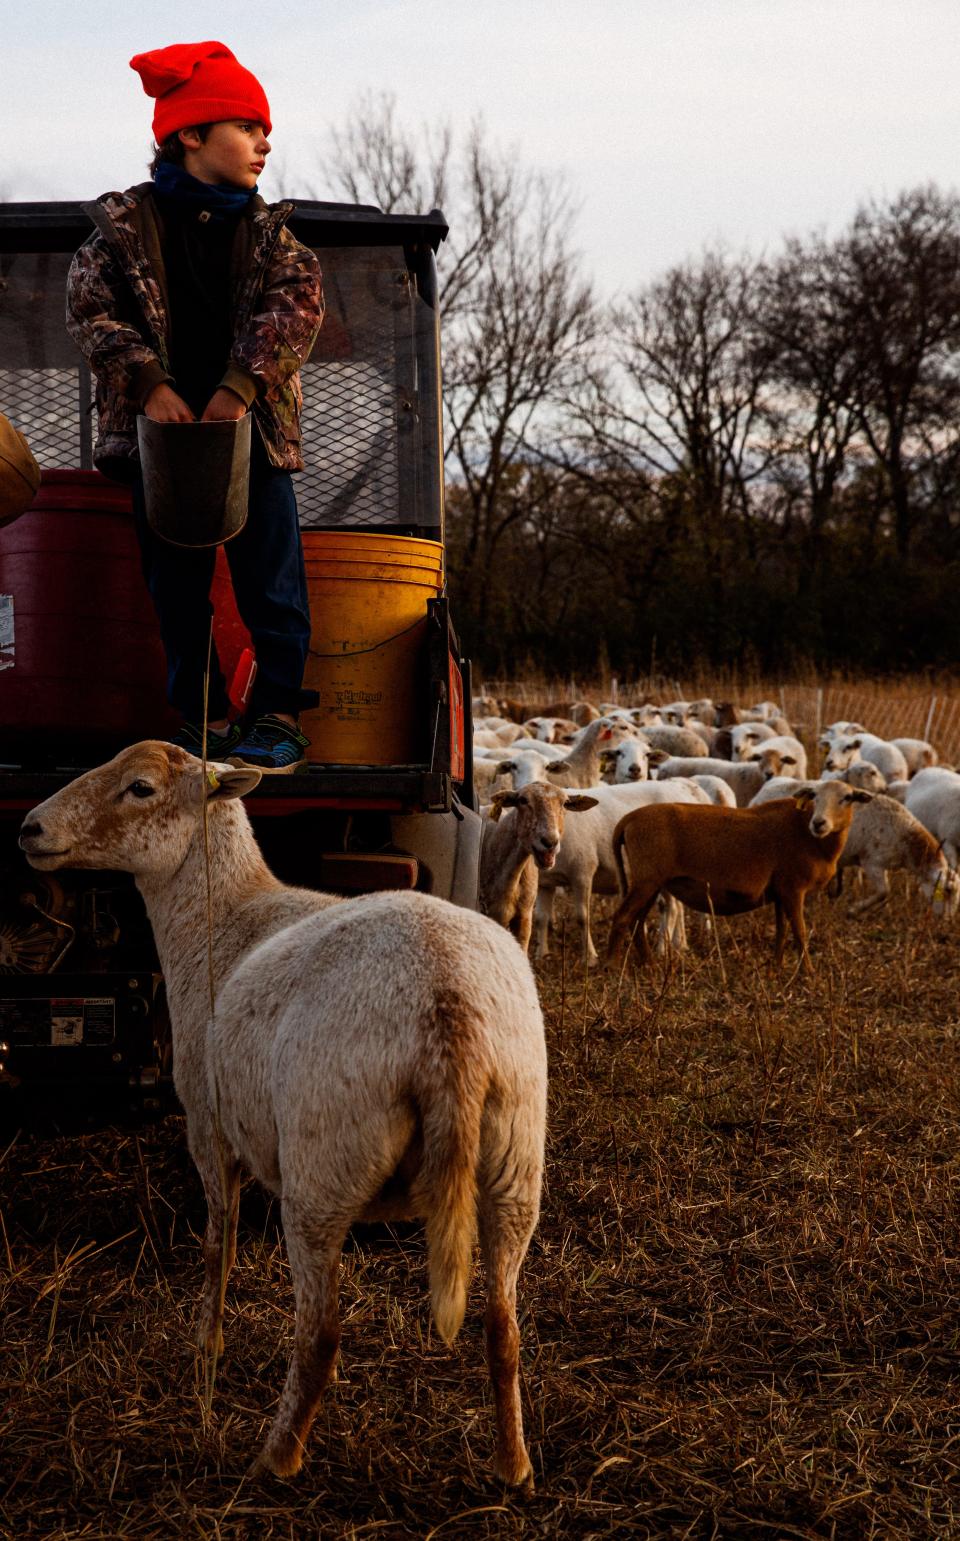 Samuel Kennedy IV feeds sheep at his families farm, Kettle Mills in Columbia, Tenn. on Nov. 18, 2022. Samuel is in line to become the eighth generation owner of Kettle Mills once he comes of age. 